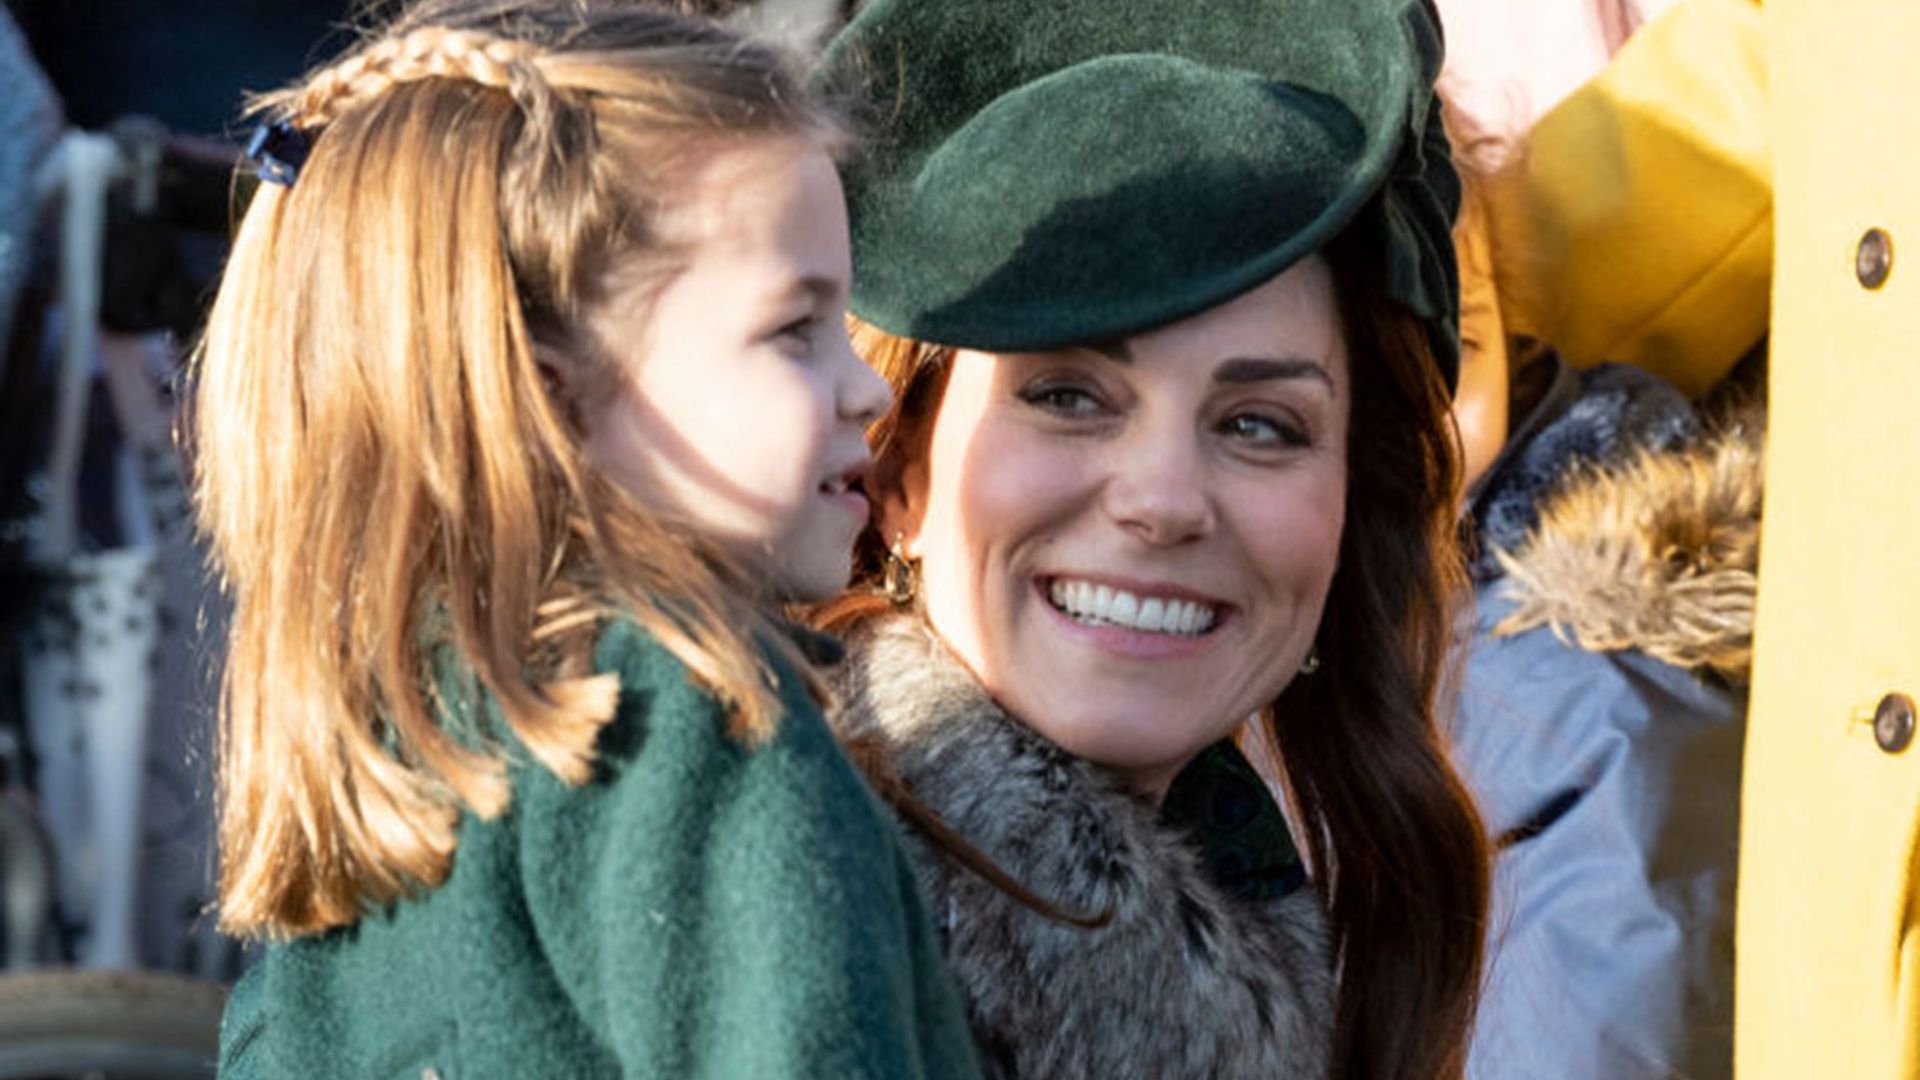 Kate Middleton would love Reiss' new childrenswear range for